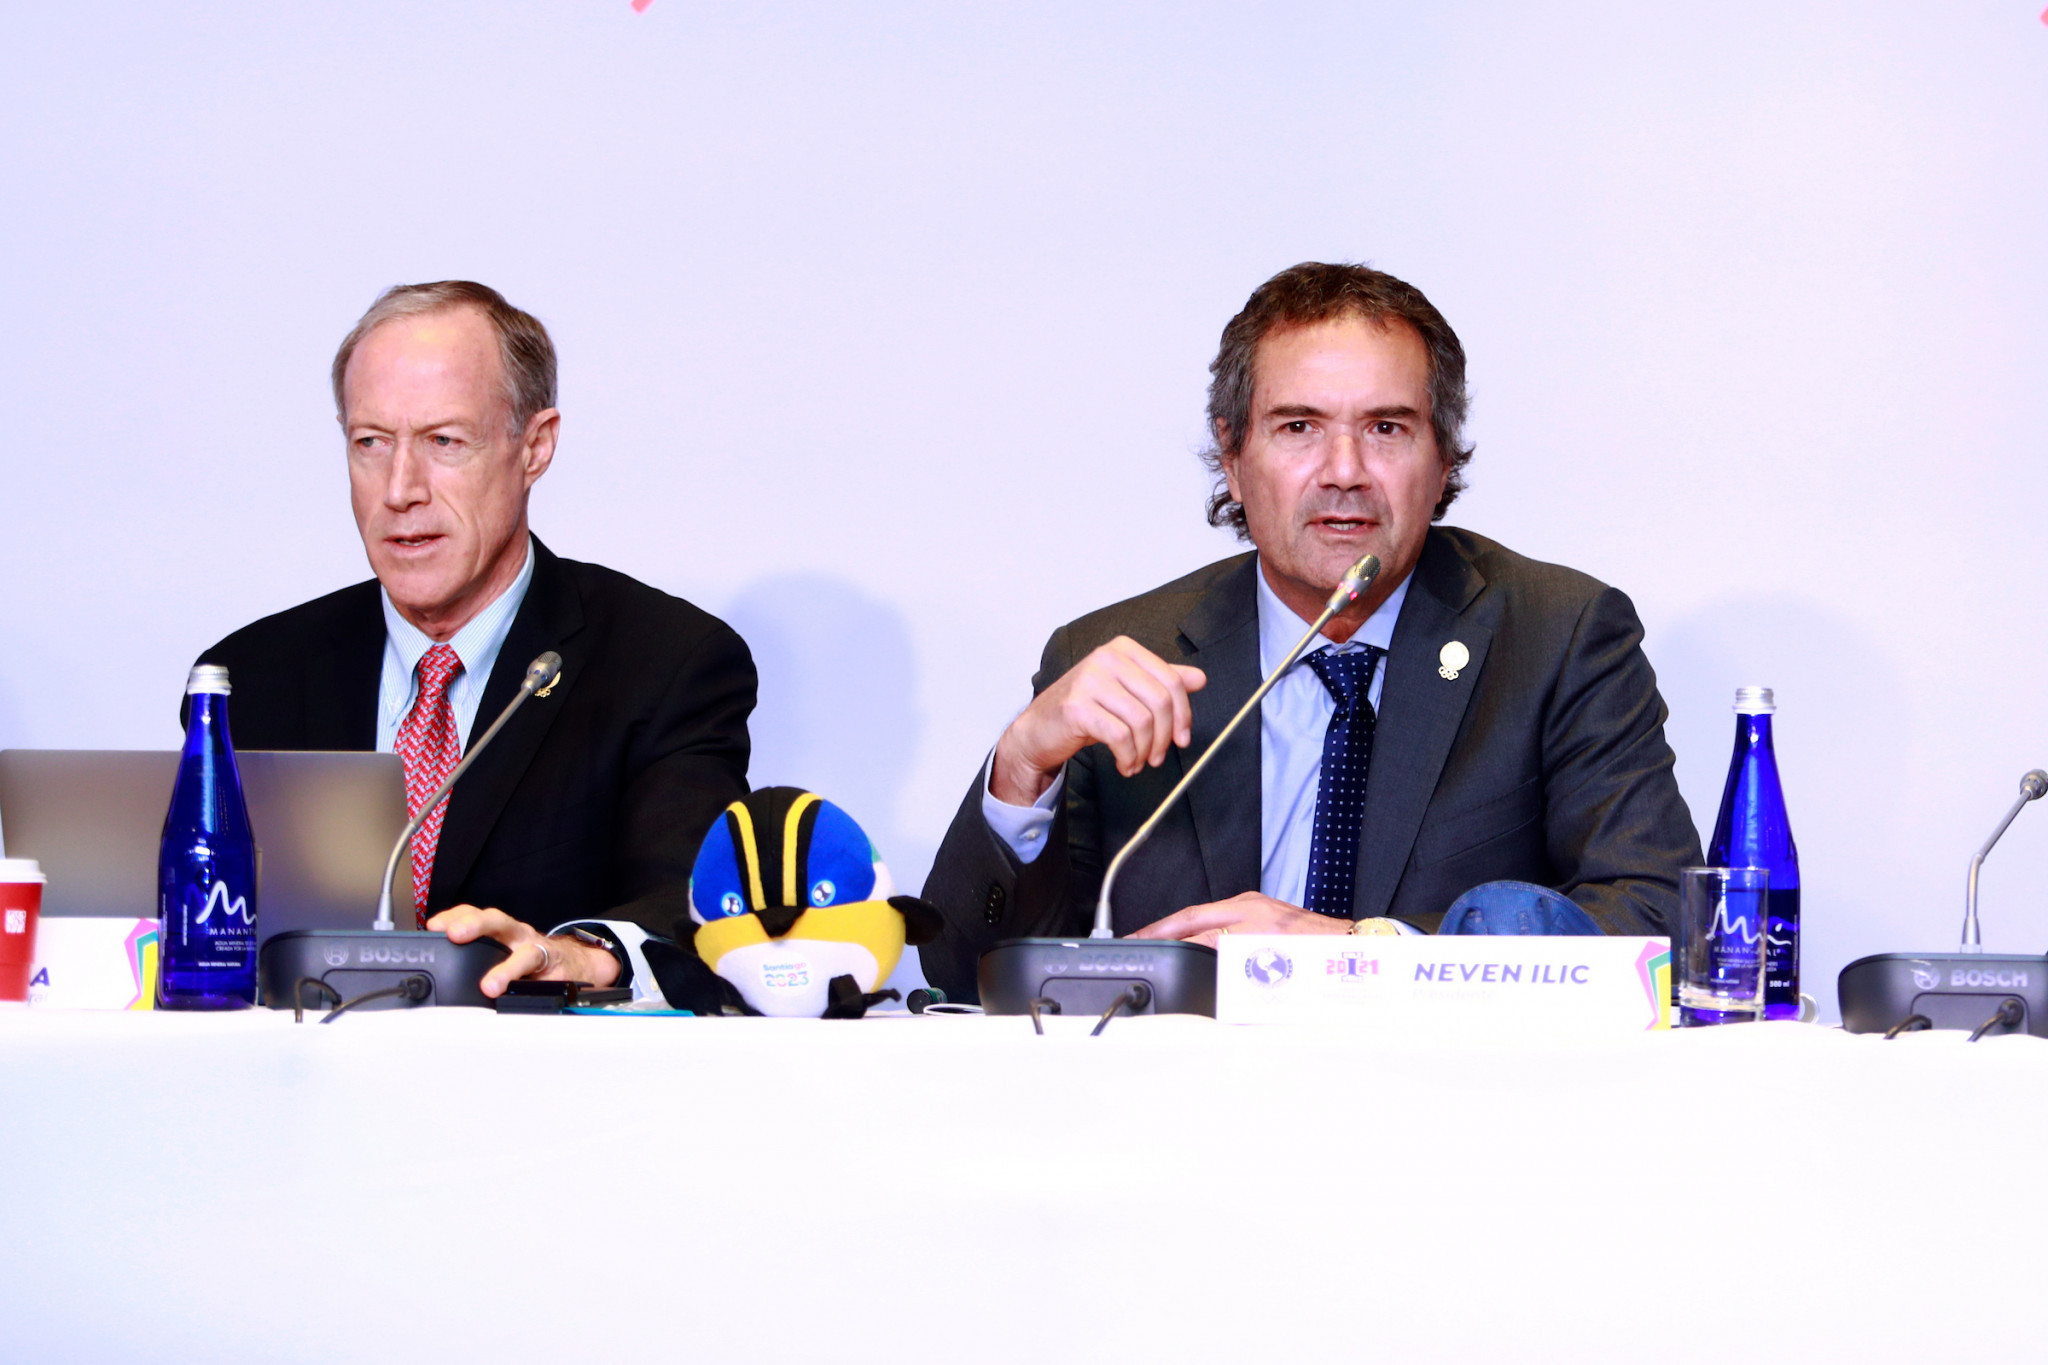 Ivar Sisniega, left, hopes Cali 2021 is the start of an athlete's journey to the Paris 2024 Olympics ©Agencia.Xpress Media